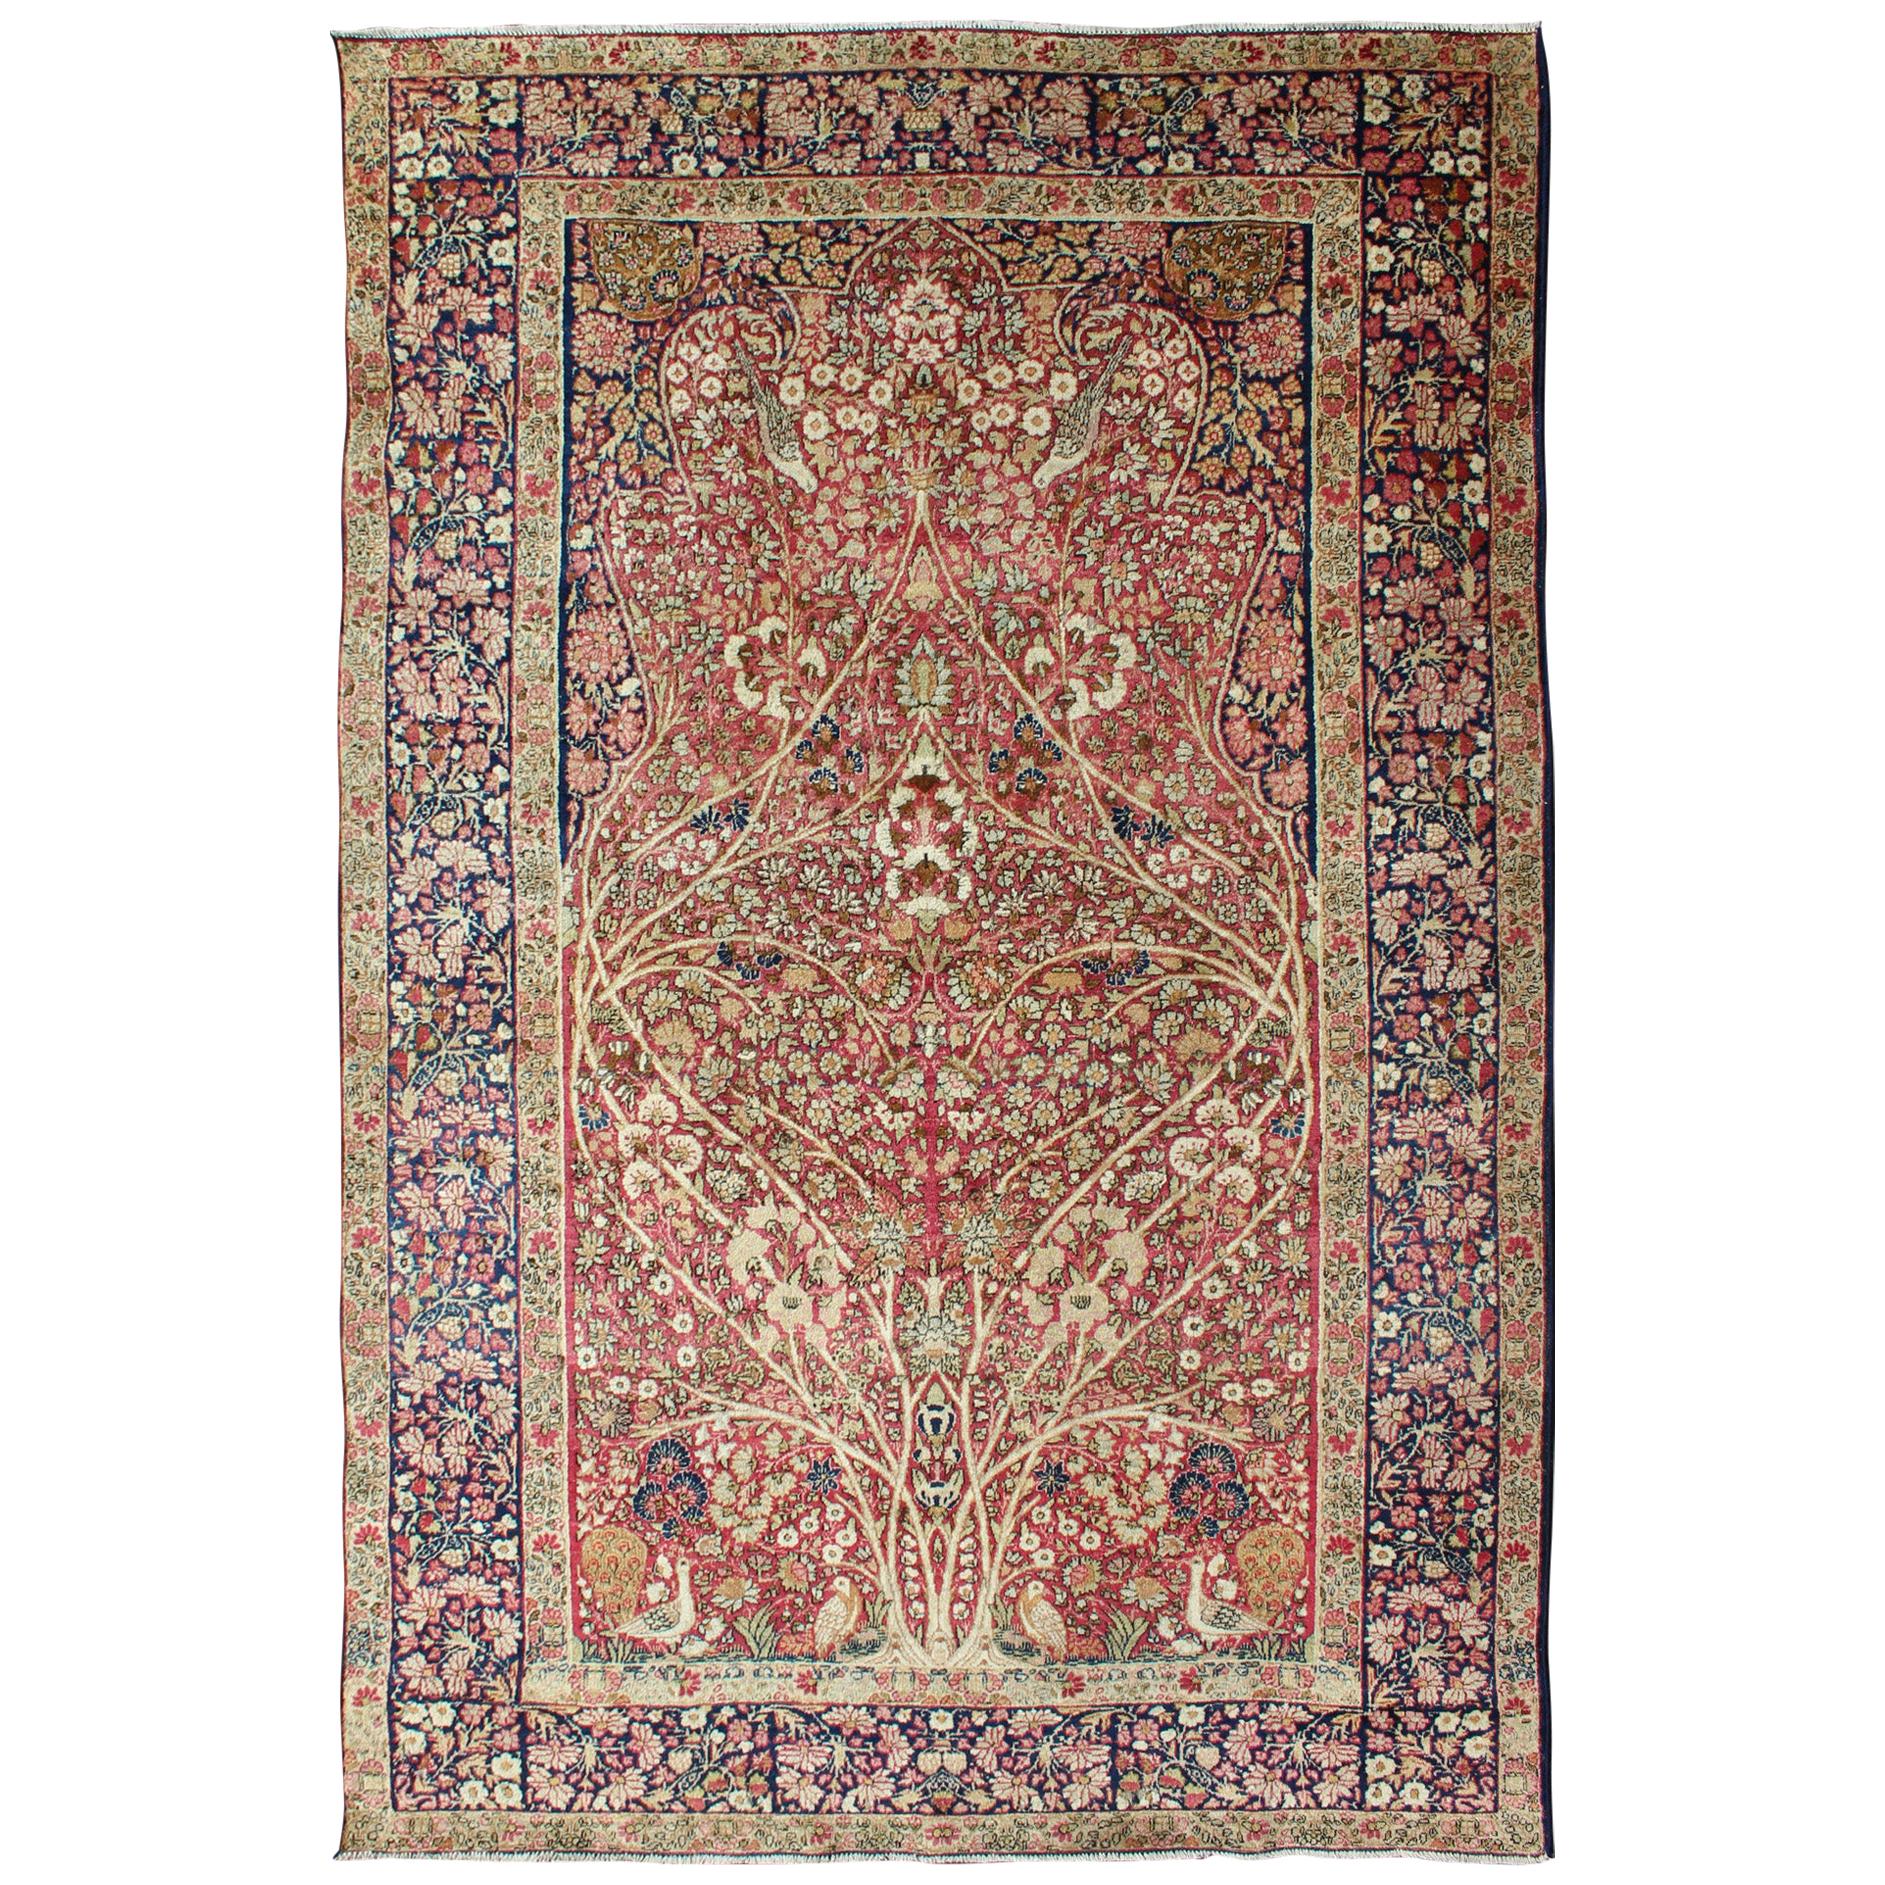 Very Fine Antique Persian Lavar Kerman Rug with Intricate Floral Design 